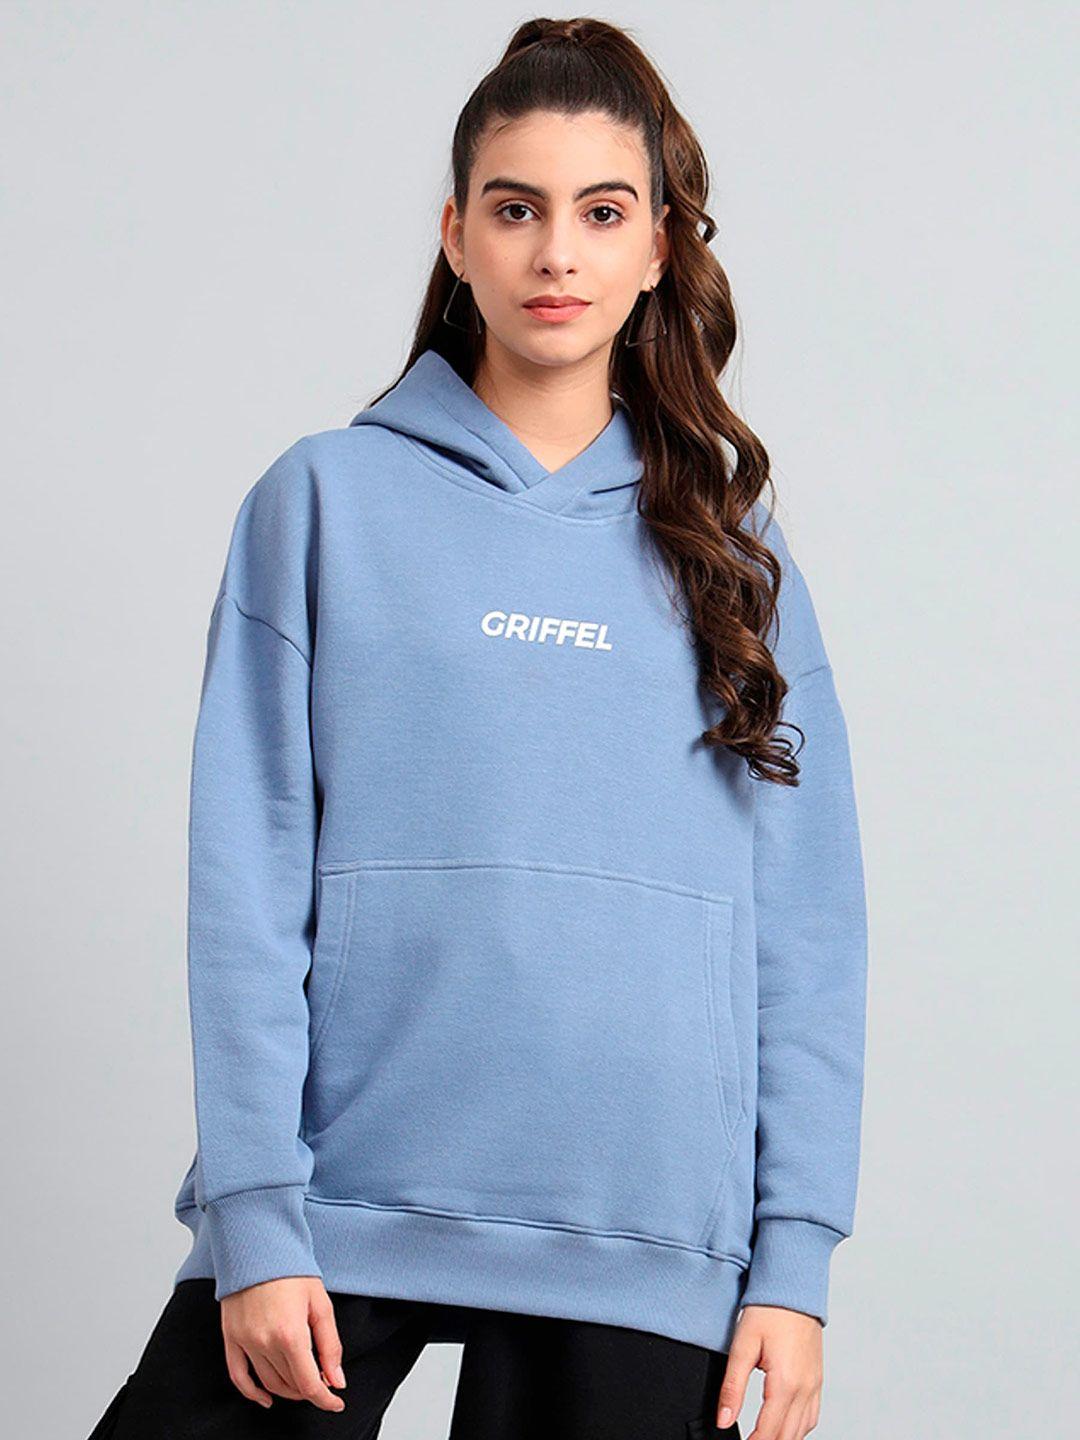 griffel hooded pullover